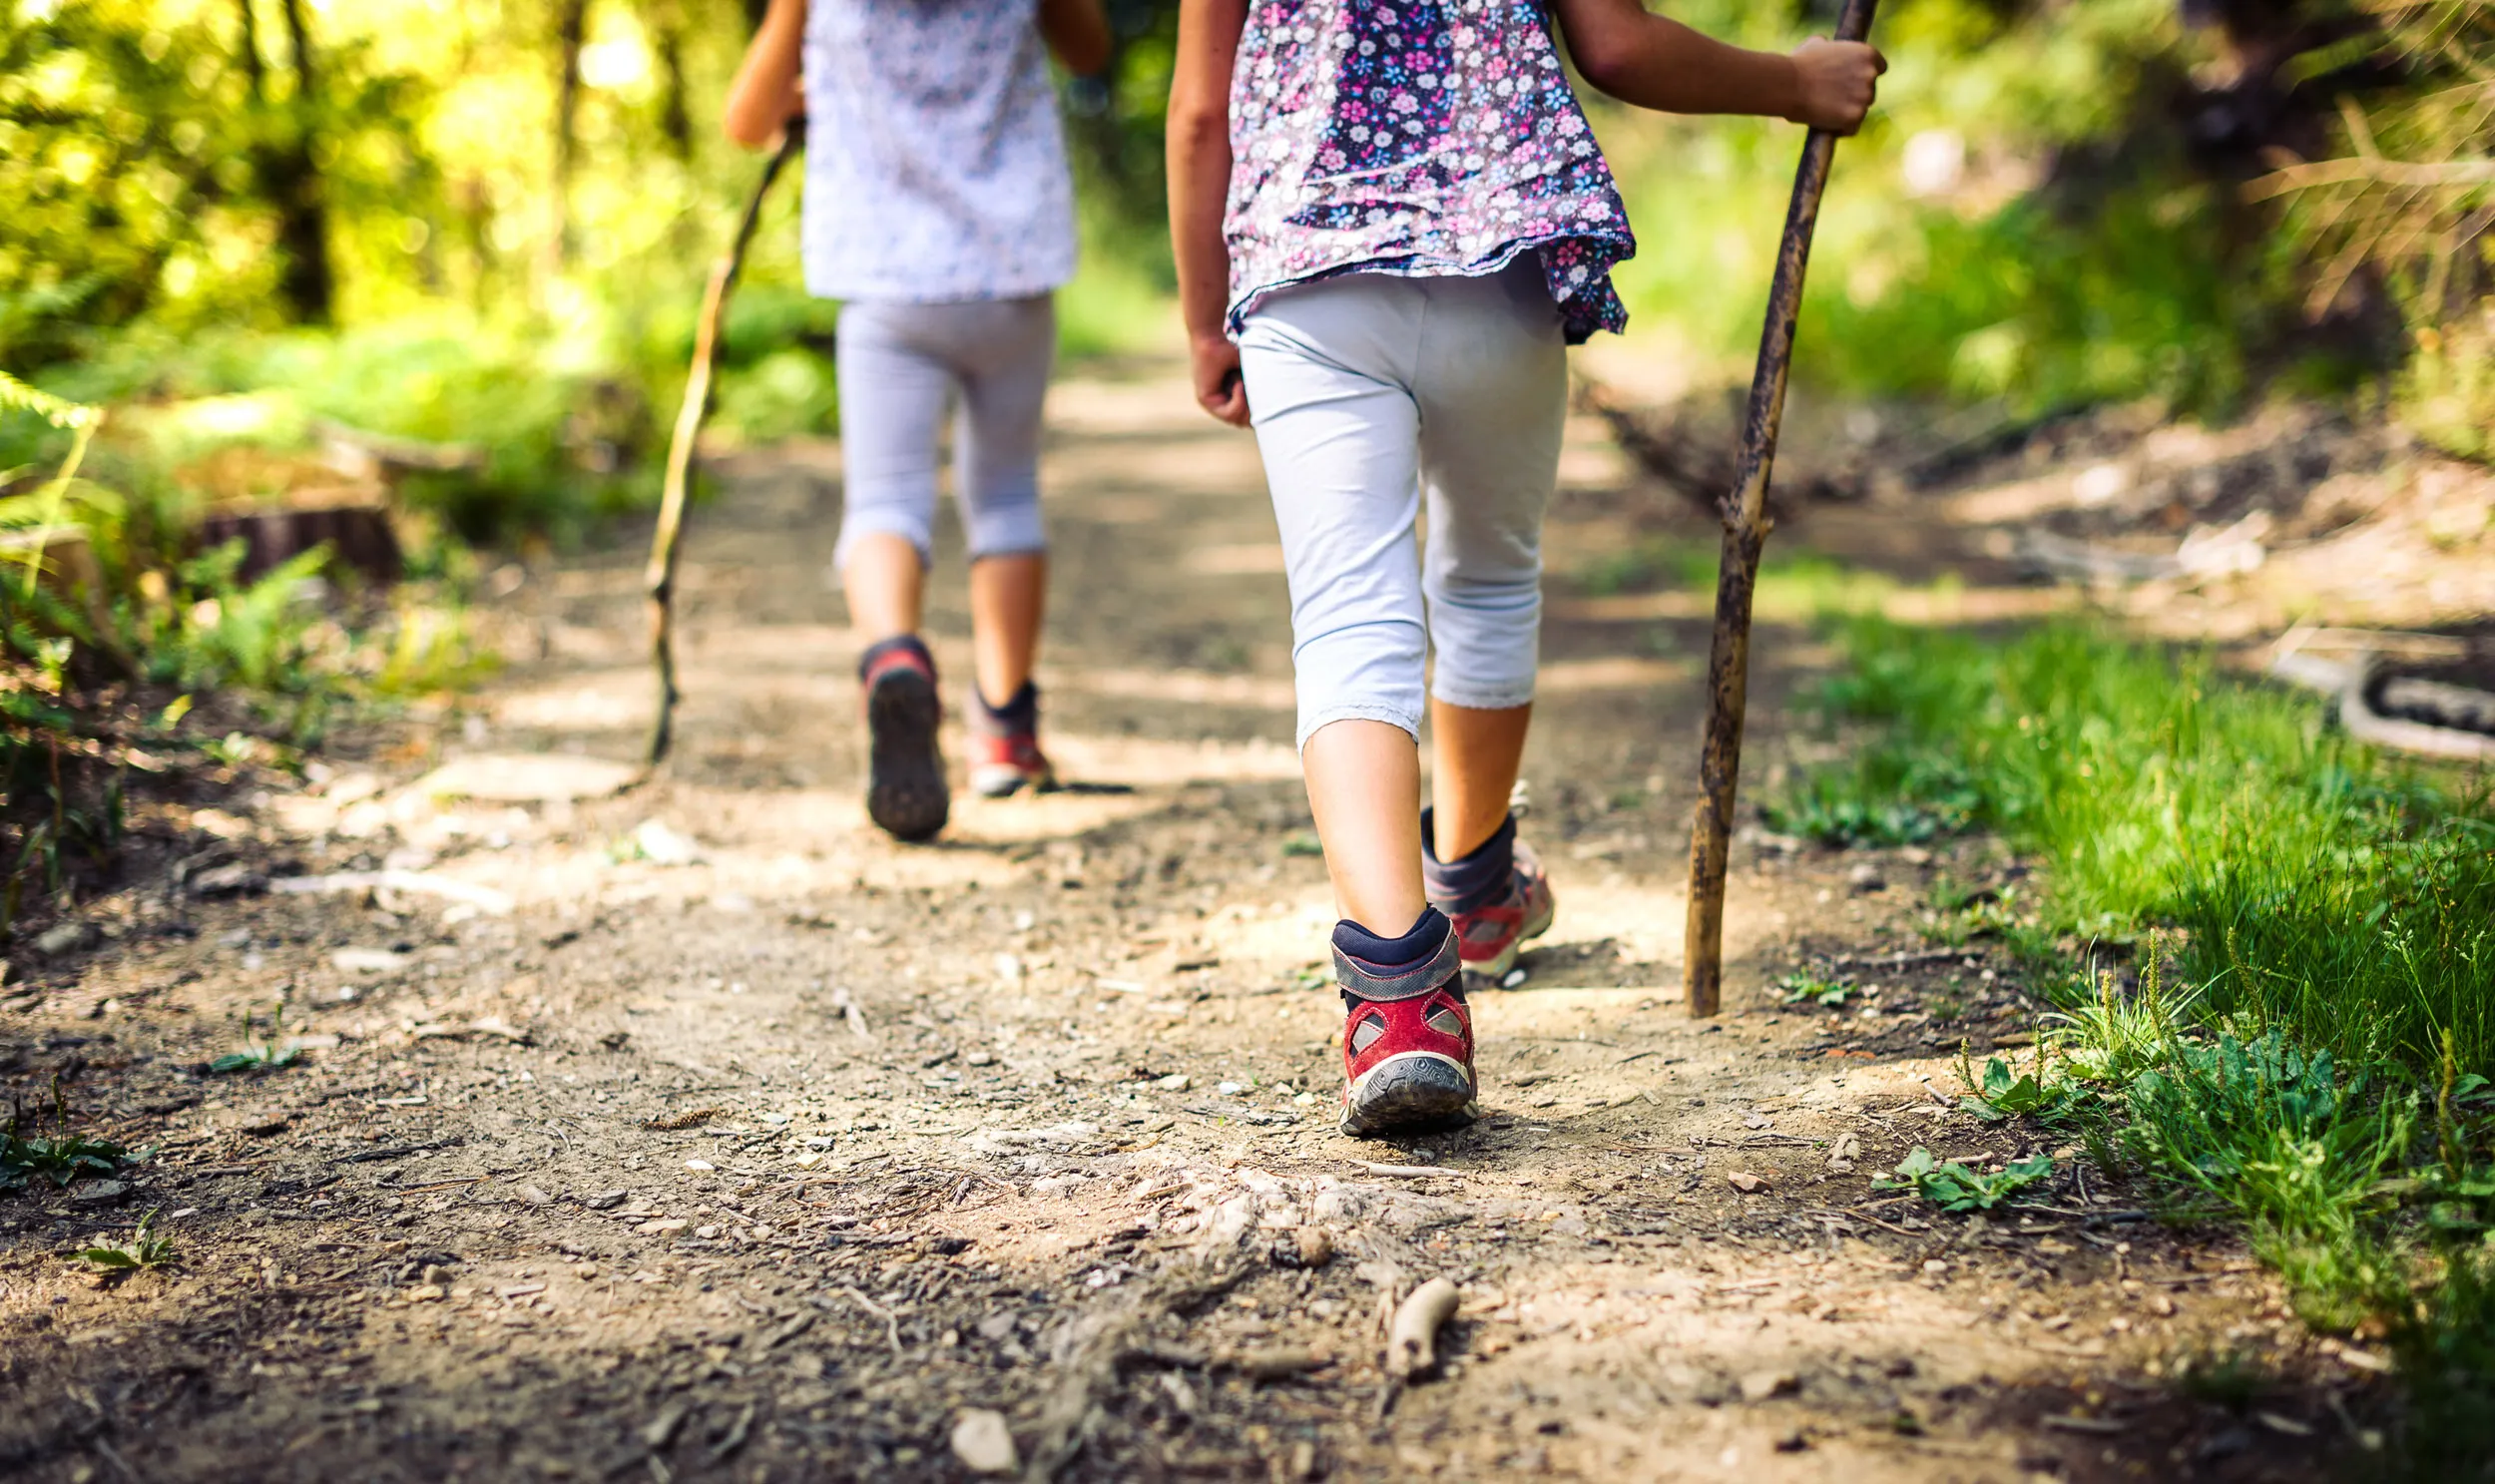 Two children in walking boots, walking away from the lens along a woodland dirt track, each holding a branch to use as a hiking pole.